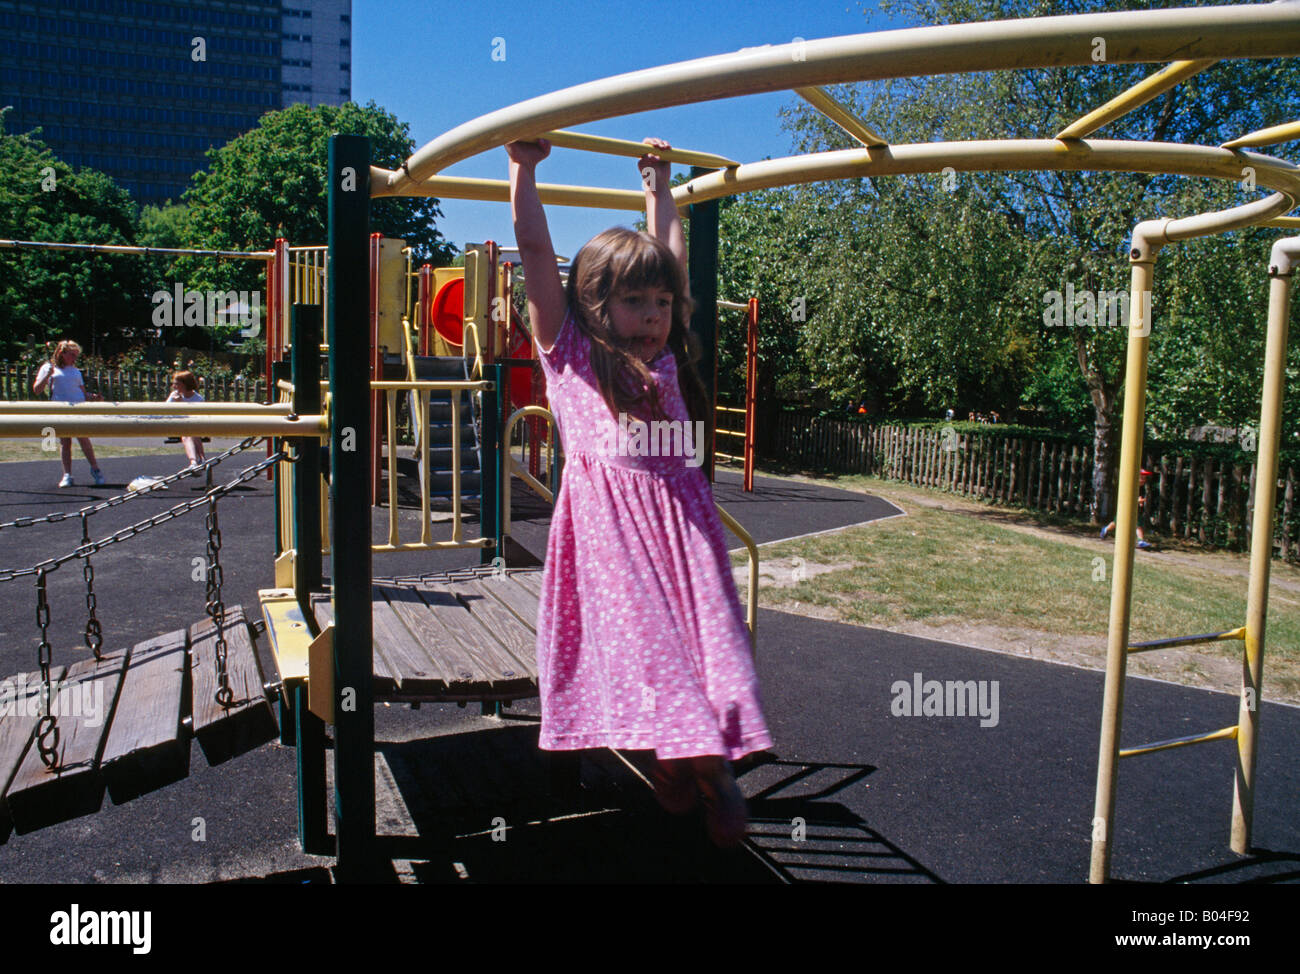 Child In Playground On Climbing Frame Stock Photo